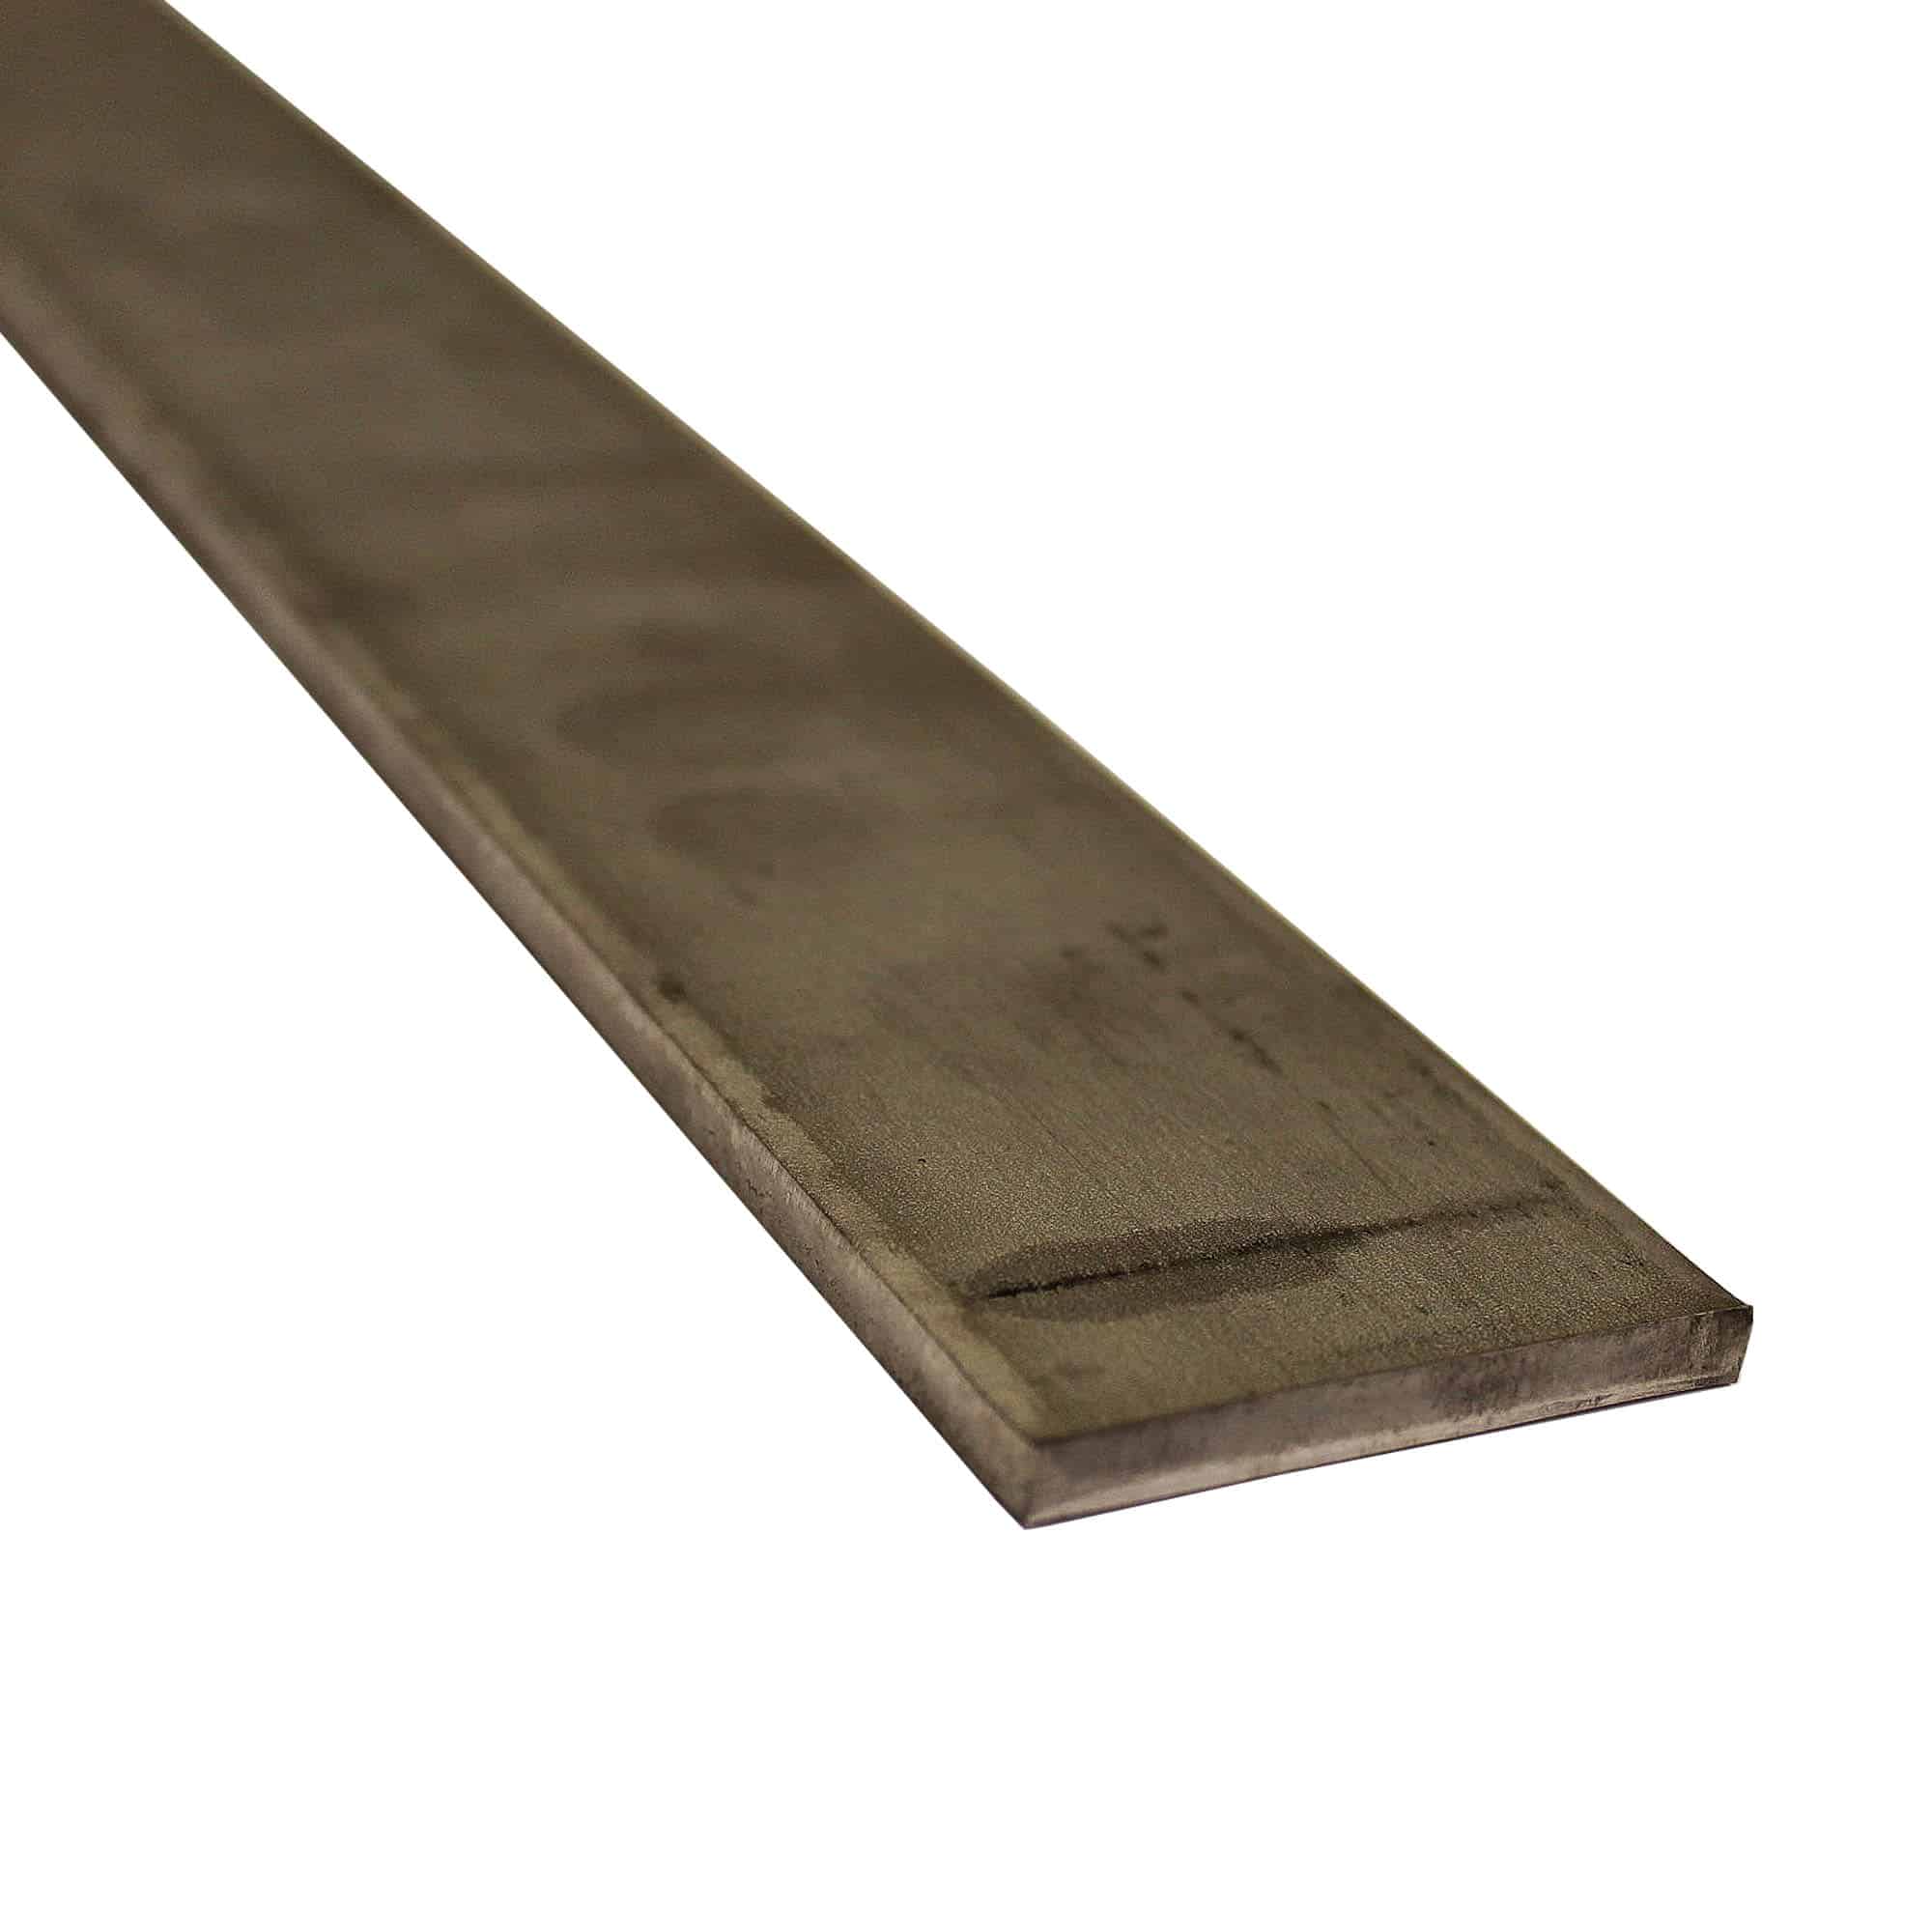 Stainless Steel Flat Bar 6mm Thick x 50mm Width